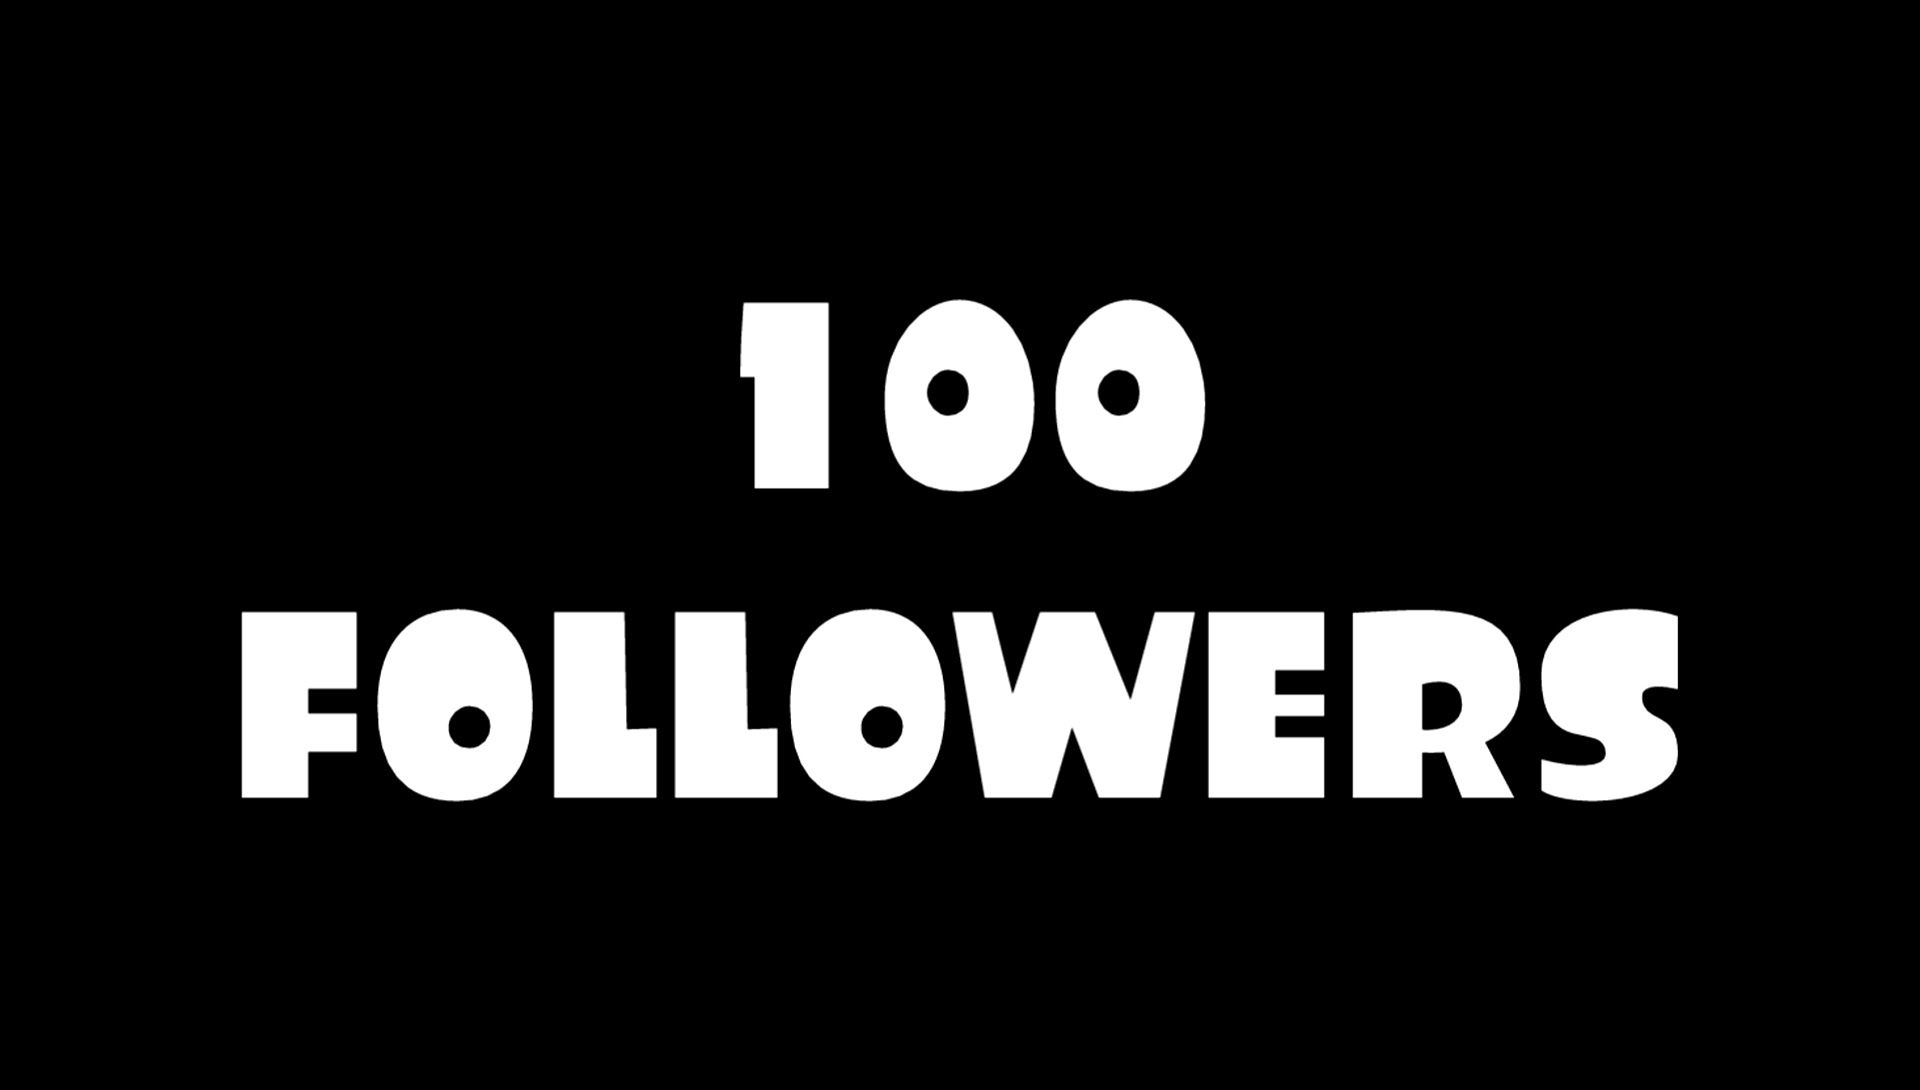 100 followers already - comment and I'll follow you back! 